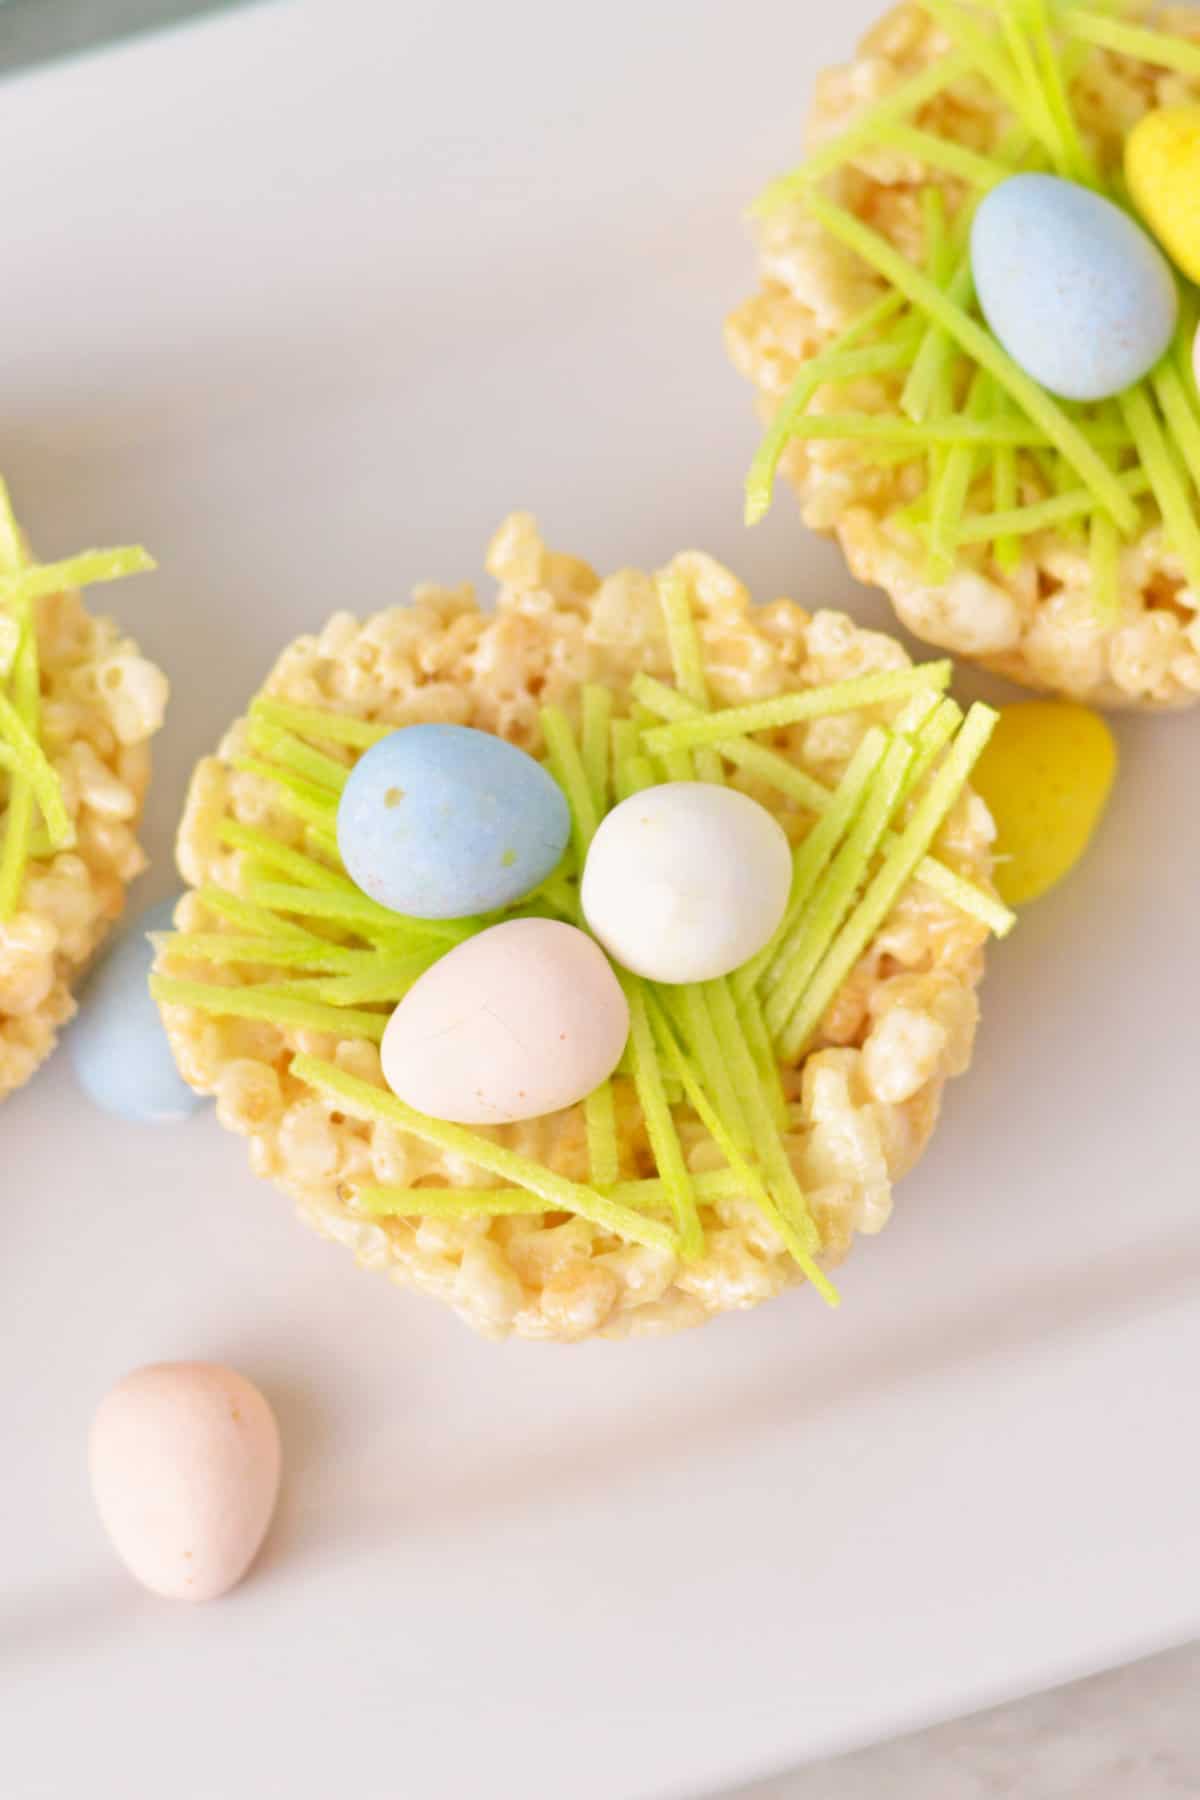 Overhead view of Rice cereal treat filled with cadbury mini eggs and green edible grass.